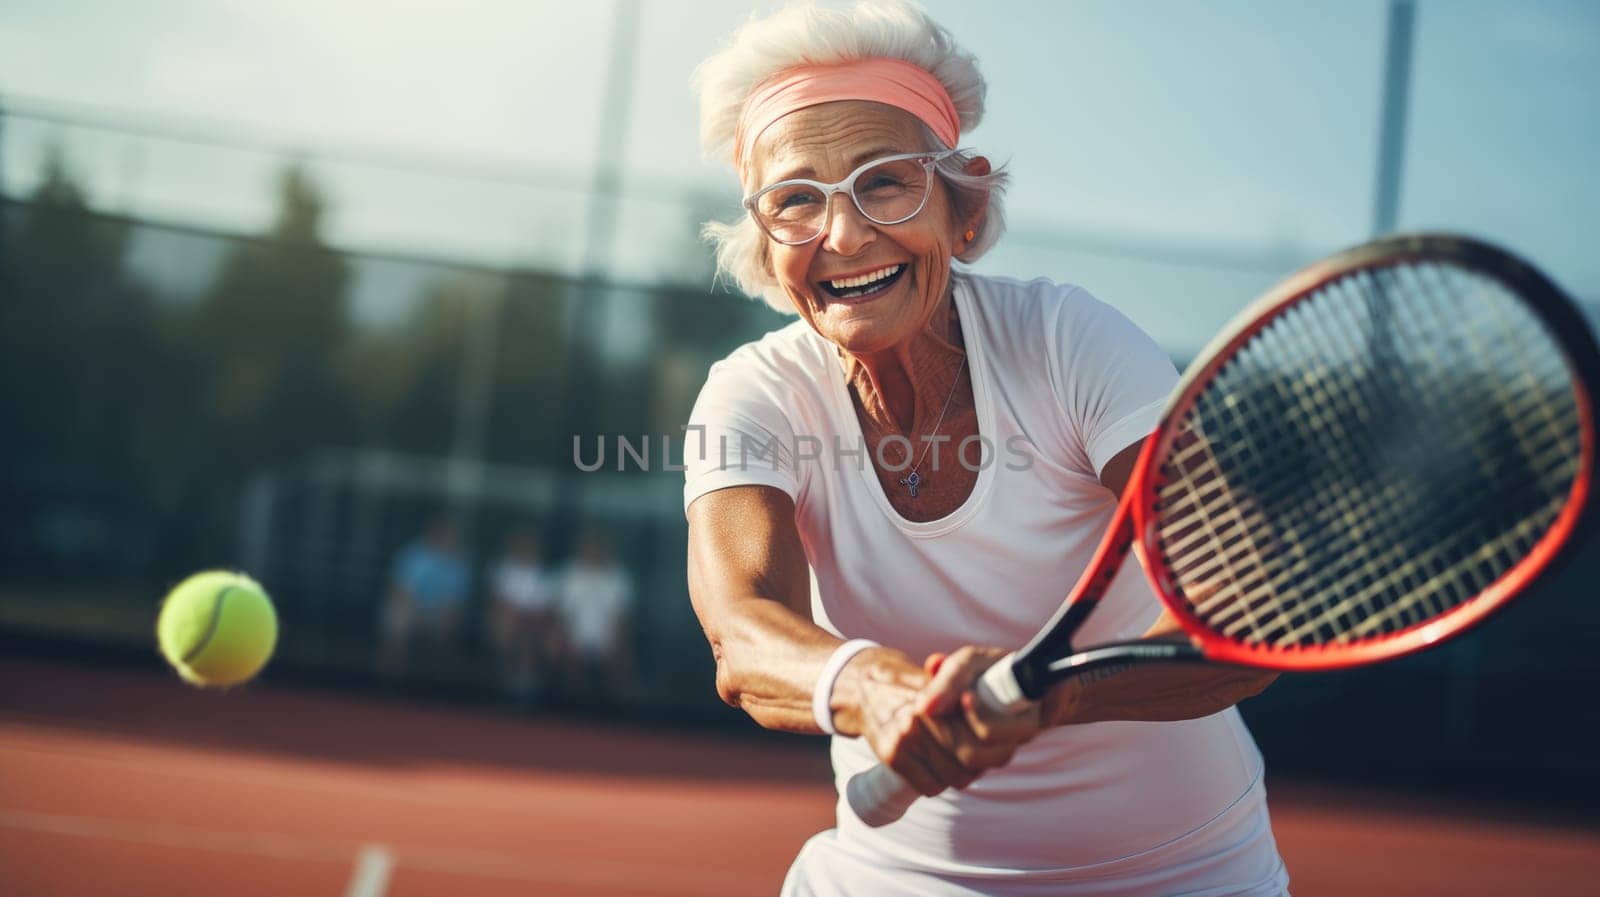 Happy and energetic elderly lady with tennis racket smiling while playing tennis on a bright and sunny day in a beautiful outdoor setting, enjoying the sport and staying healthy and active.